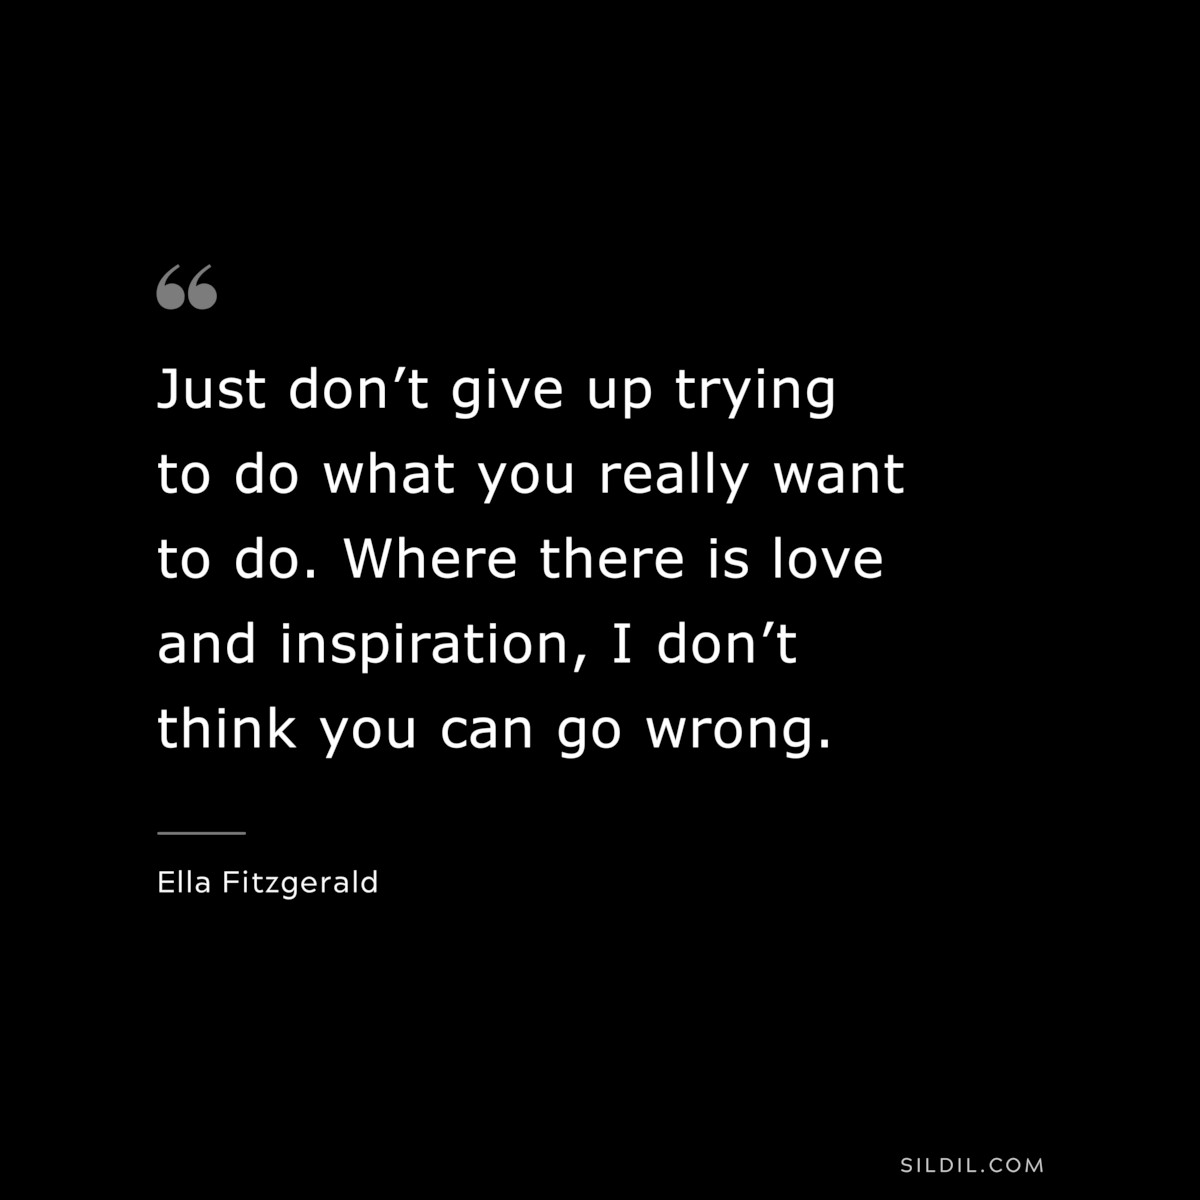 Just don’t give up trying to do what you really want to do. Where there is love and inspiration, I don’t think you can go wrong. ― Ella Fitzgerald